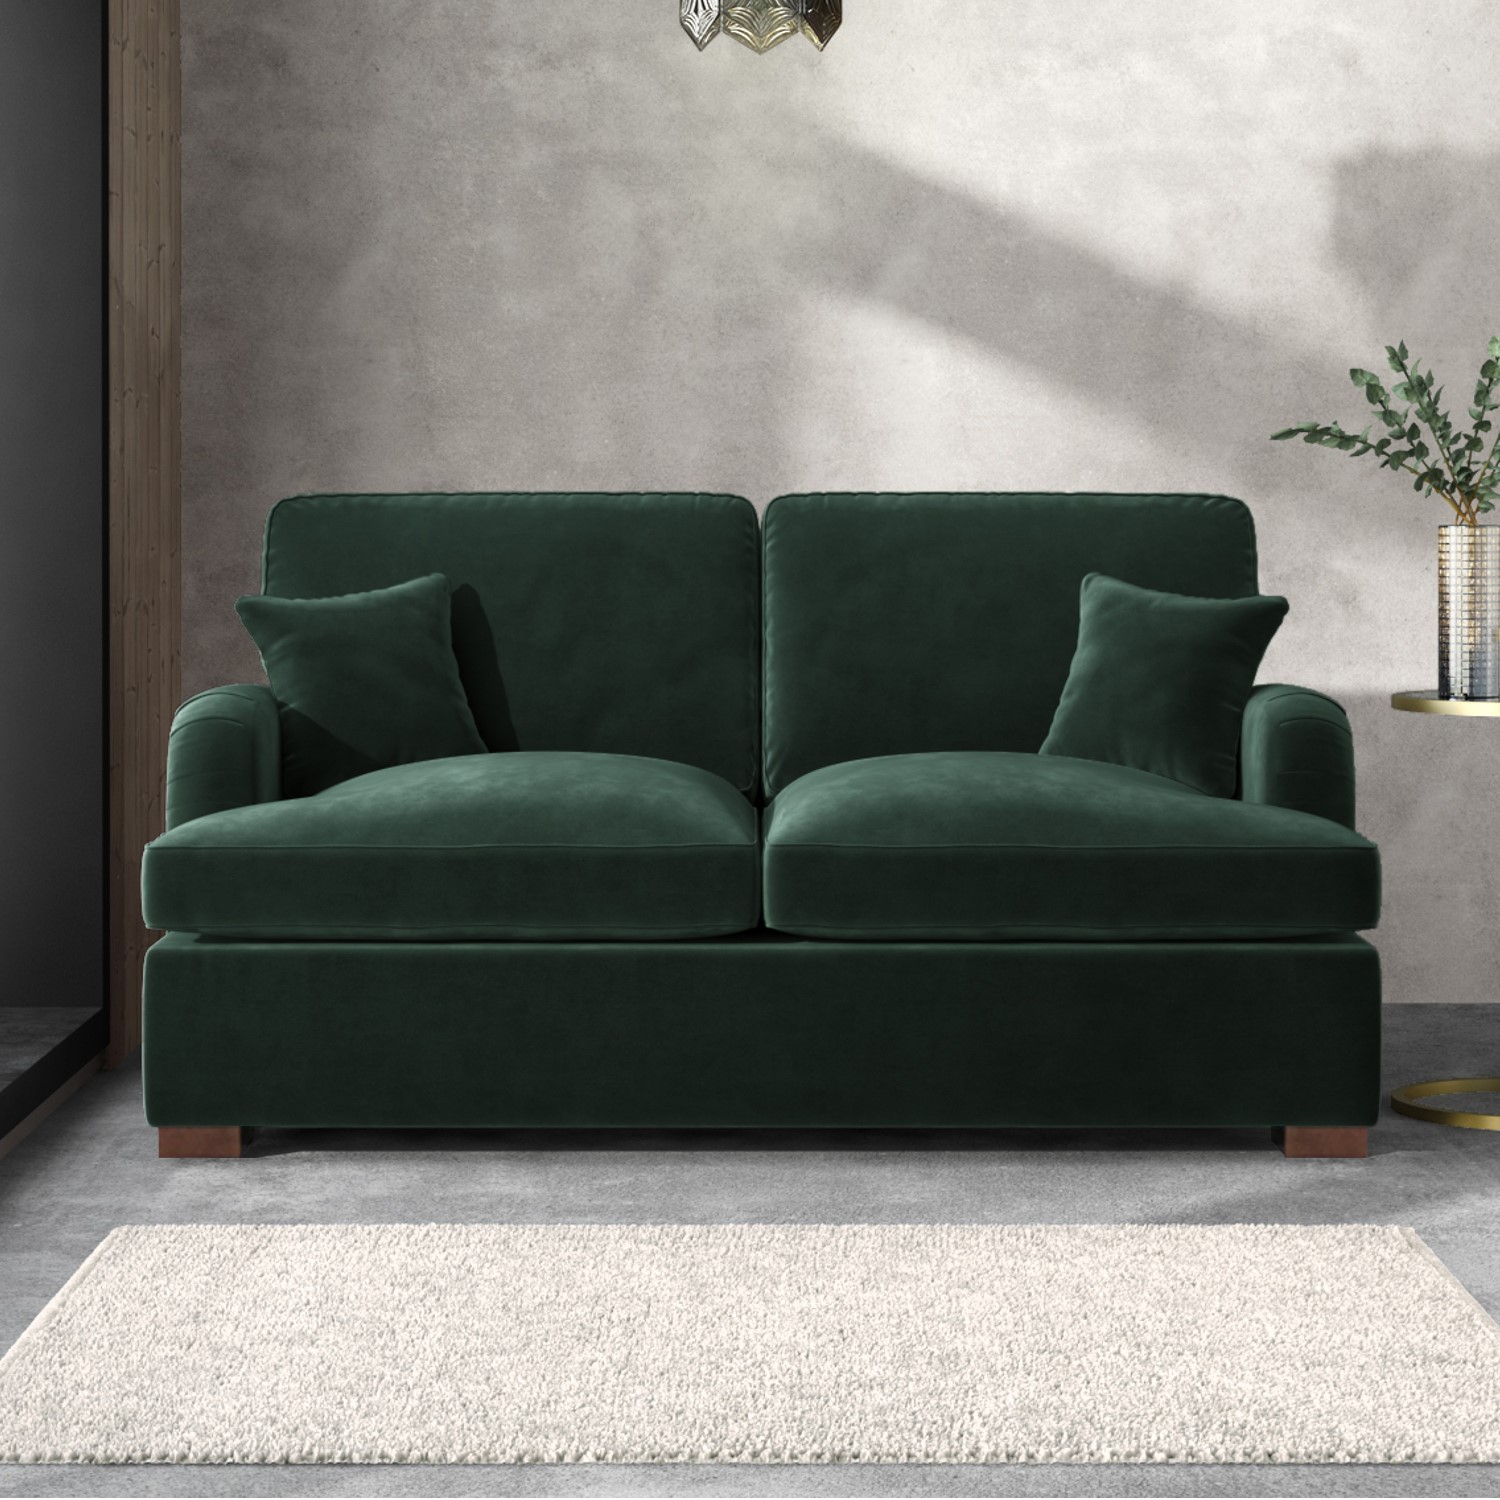 Photo of Dark green velvet pull out sofa bed - seats 2 - payton